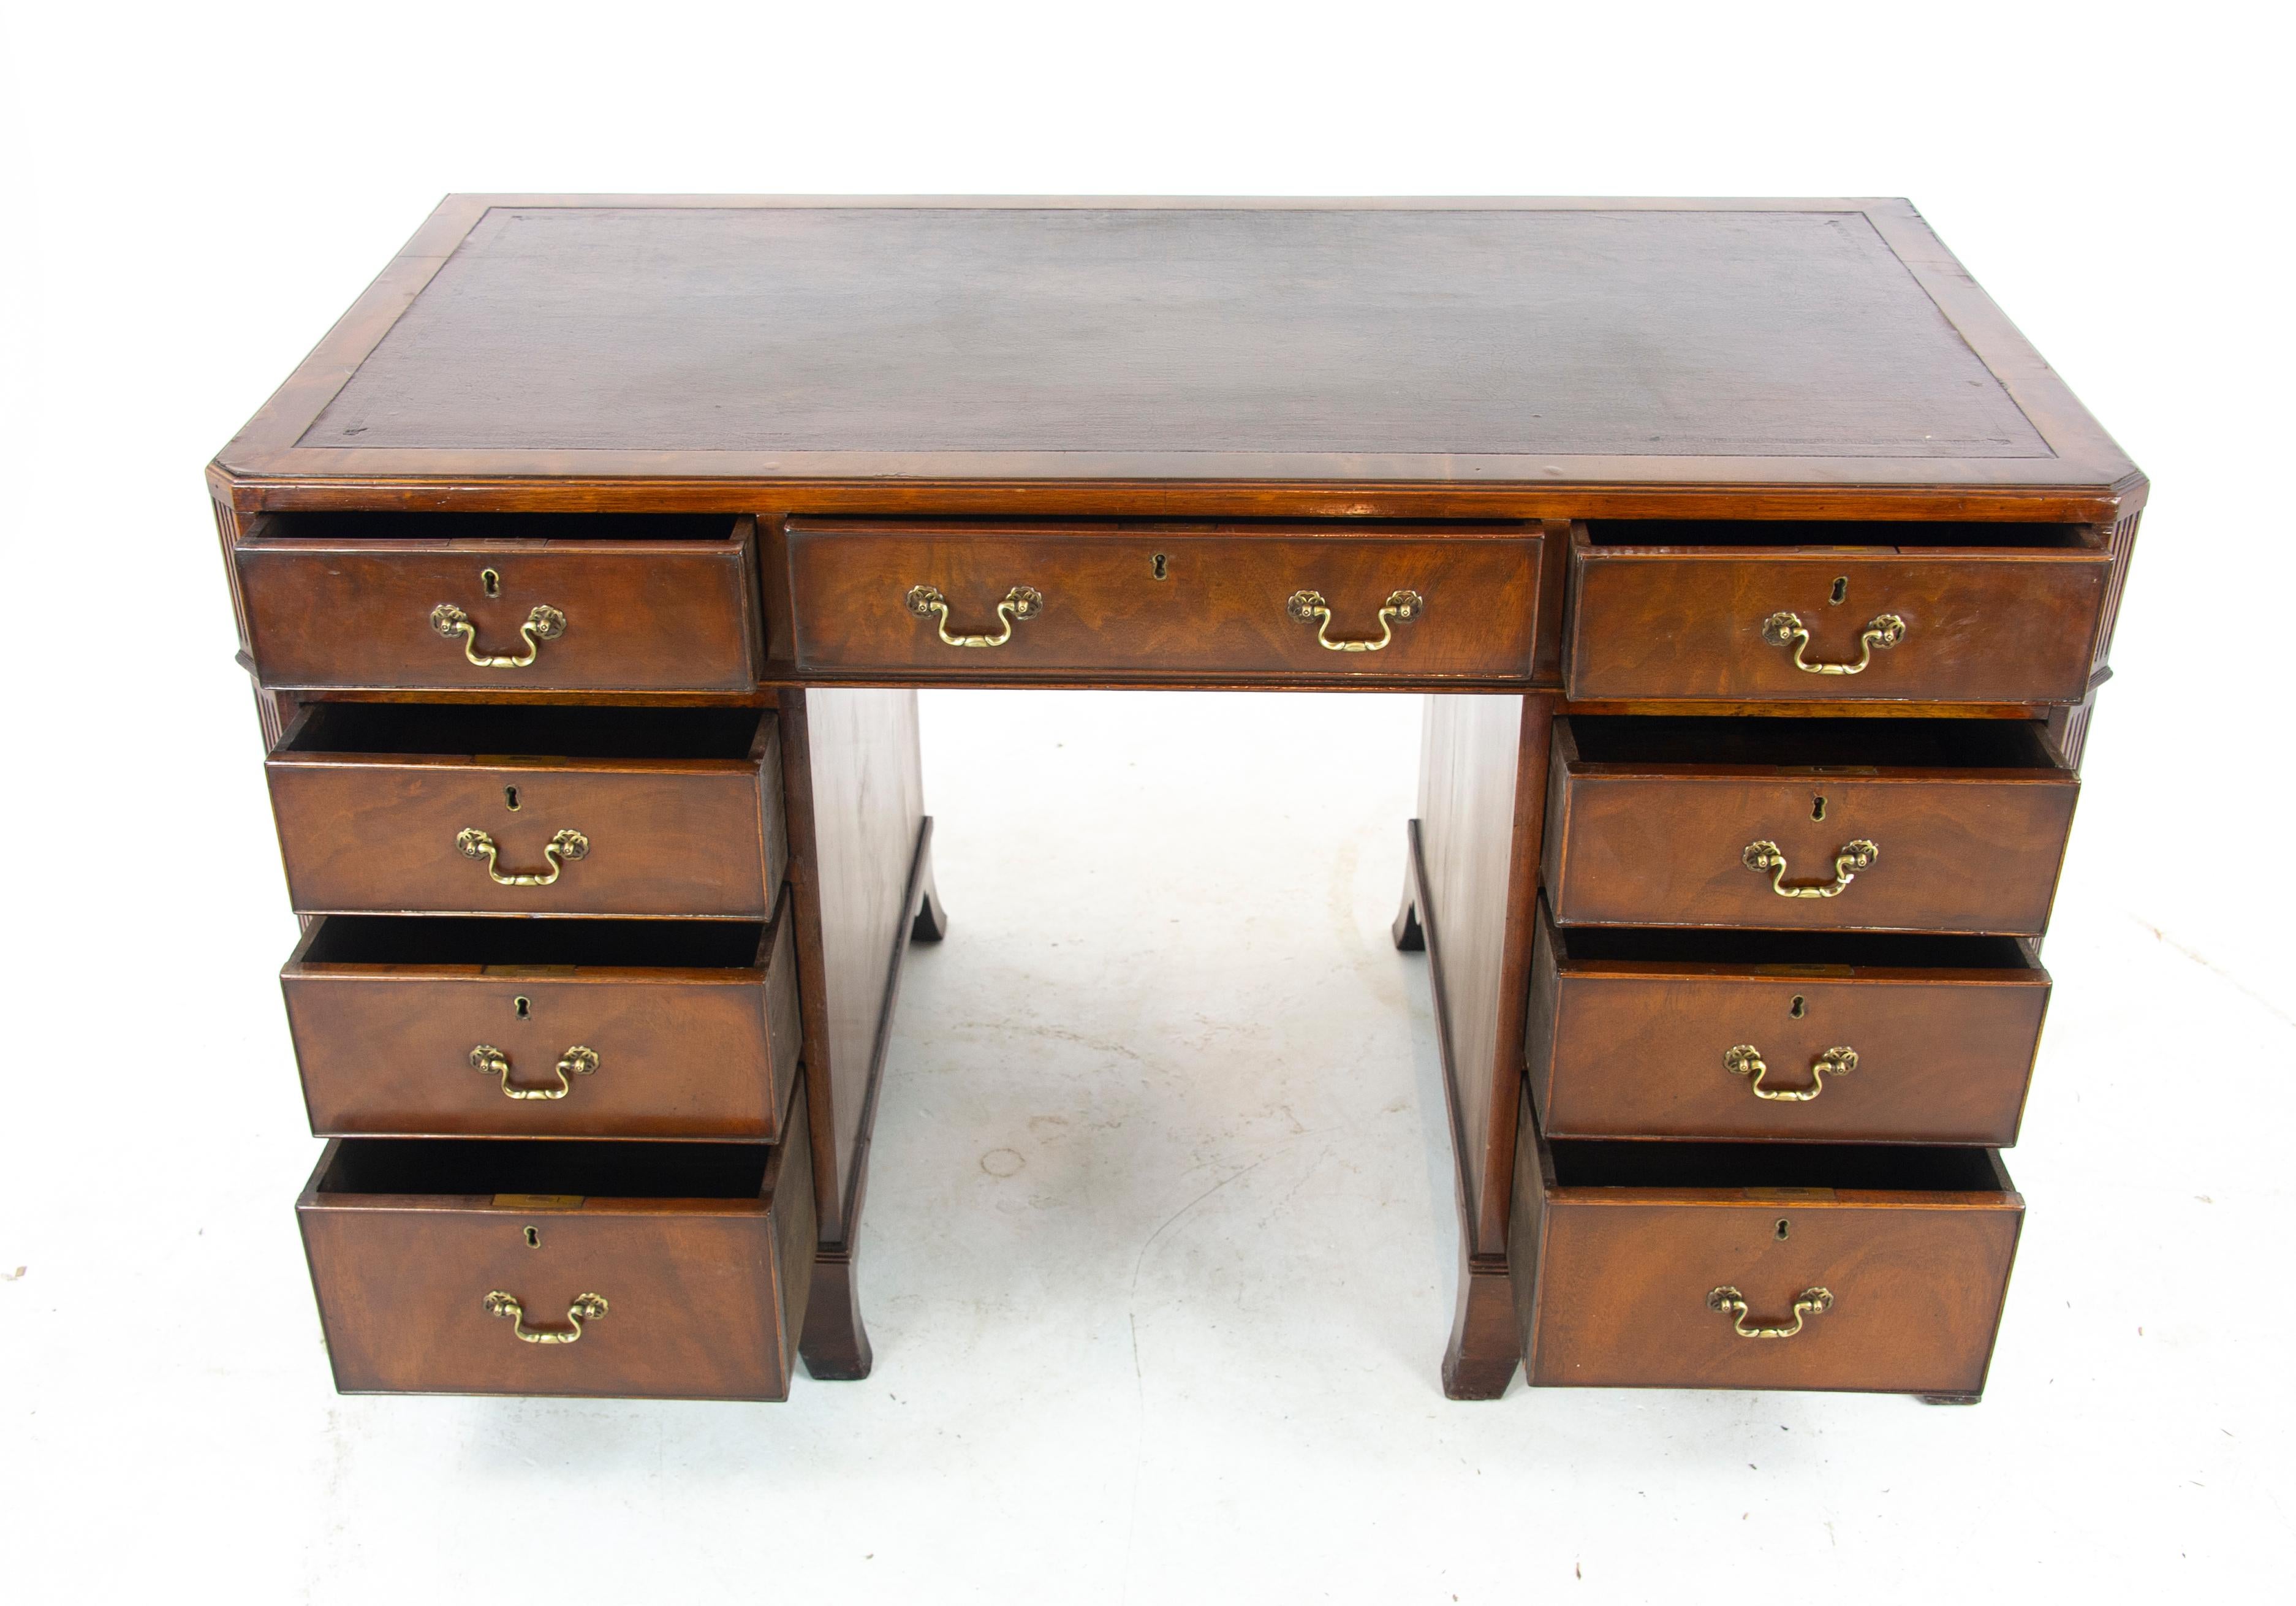 Double pedestal desk, walnut desk, leather top, Scotland,1920, Antique Furniture, B1283, 

Scotland, 1920
Solid walnut and veneers
Original finish
Leather writing surface with moulded edge
Three frieze drawers below
Sitting on two pedestals